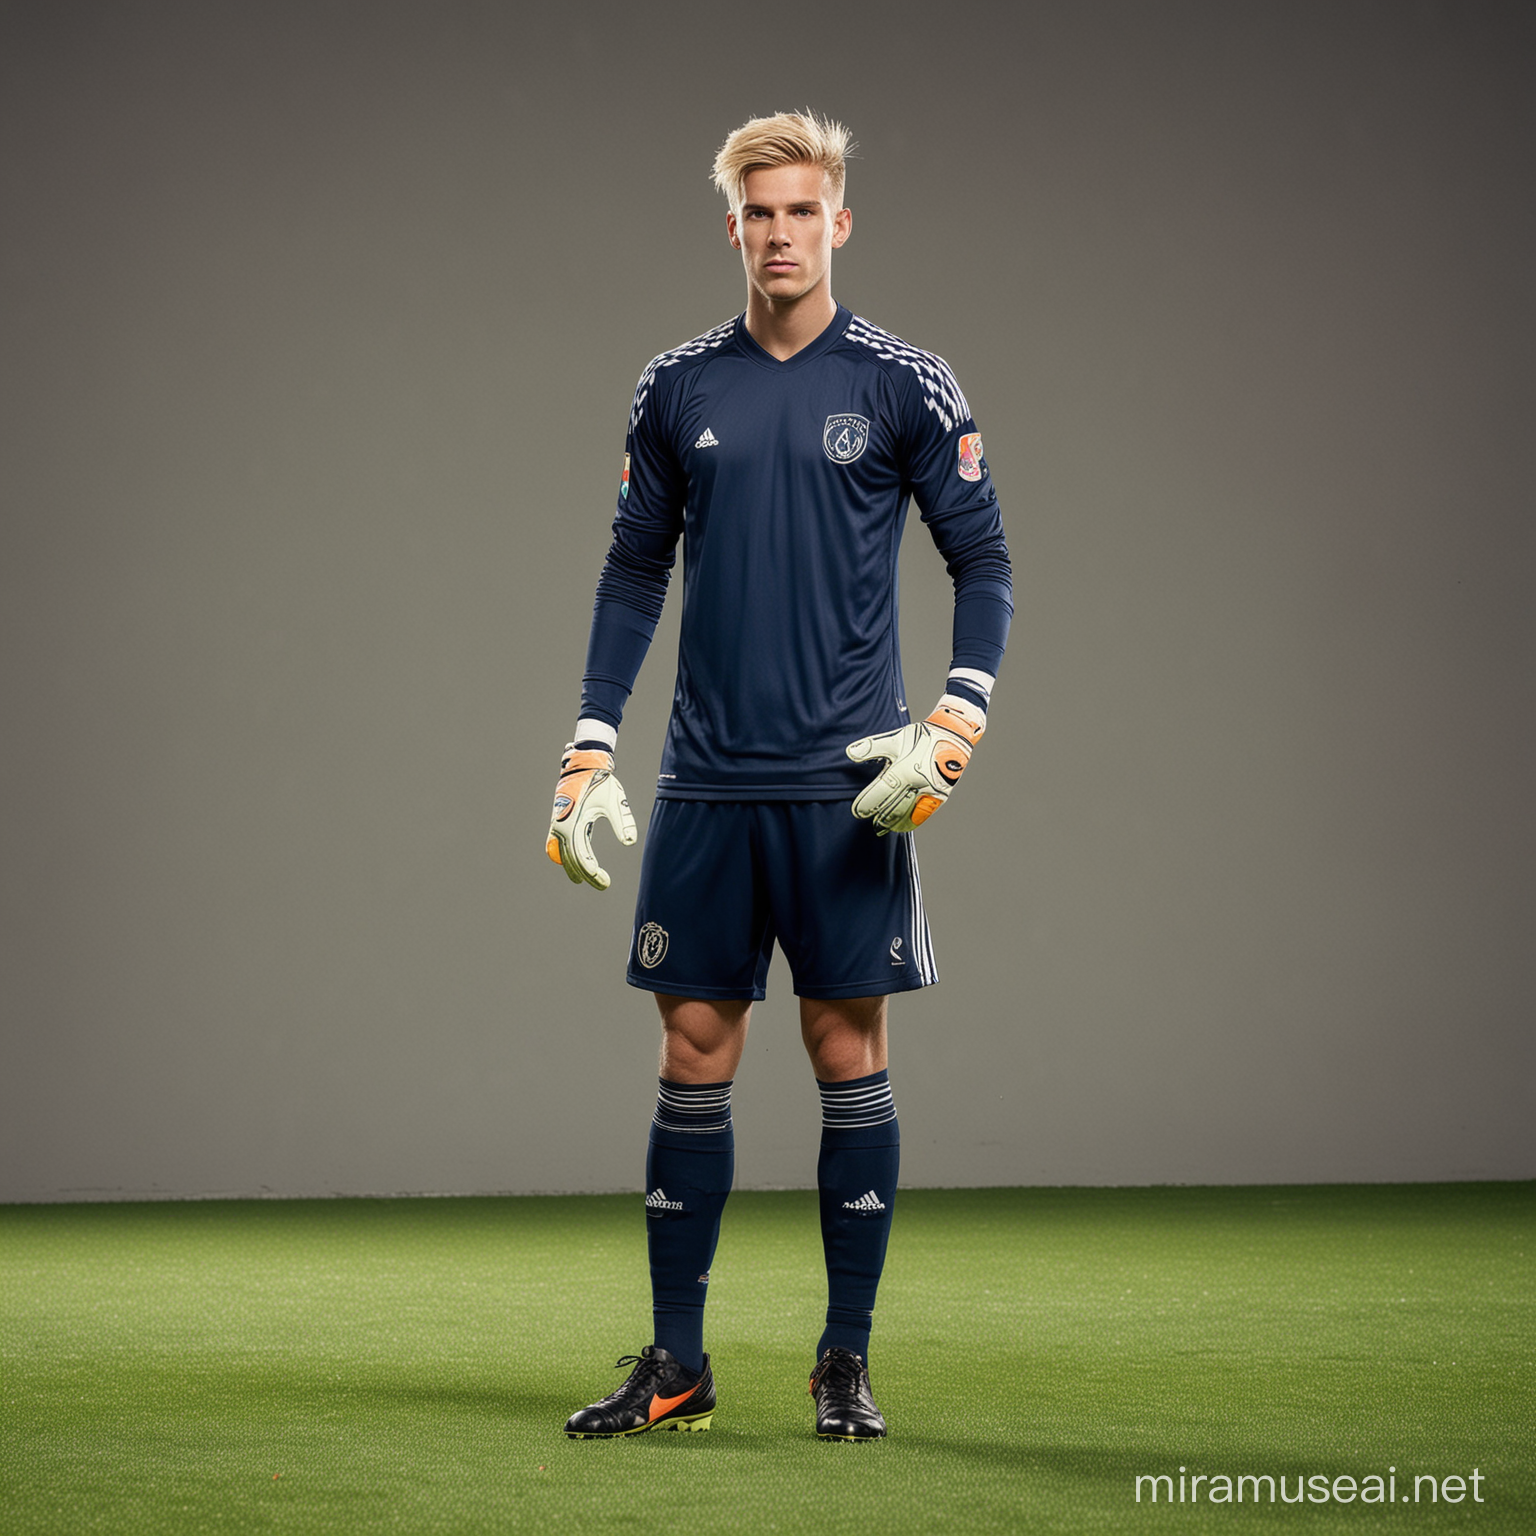 soccer goalkeeper wearing a navy blue soccer kit, blonde hair and wearing black soccer boots, standing on his own 